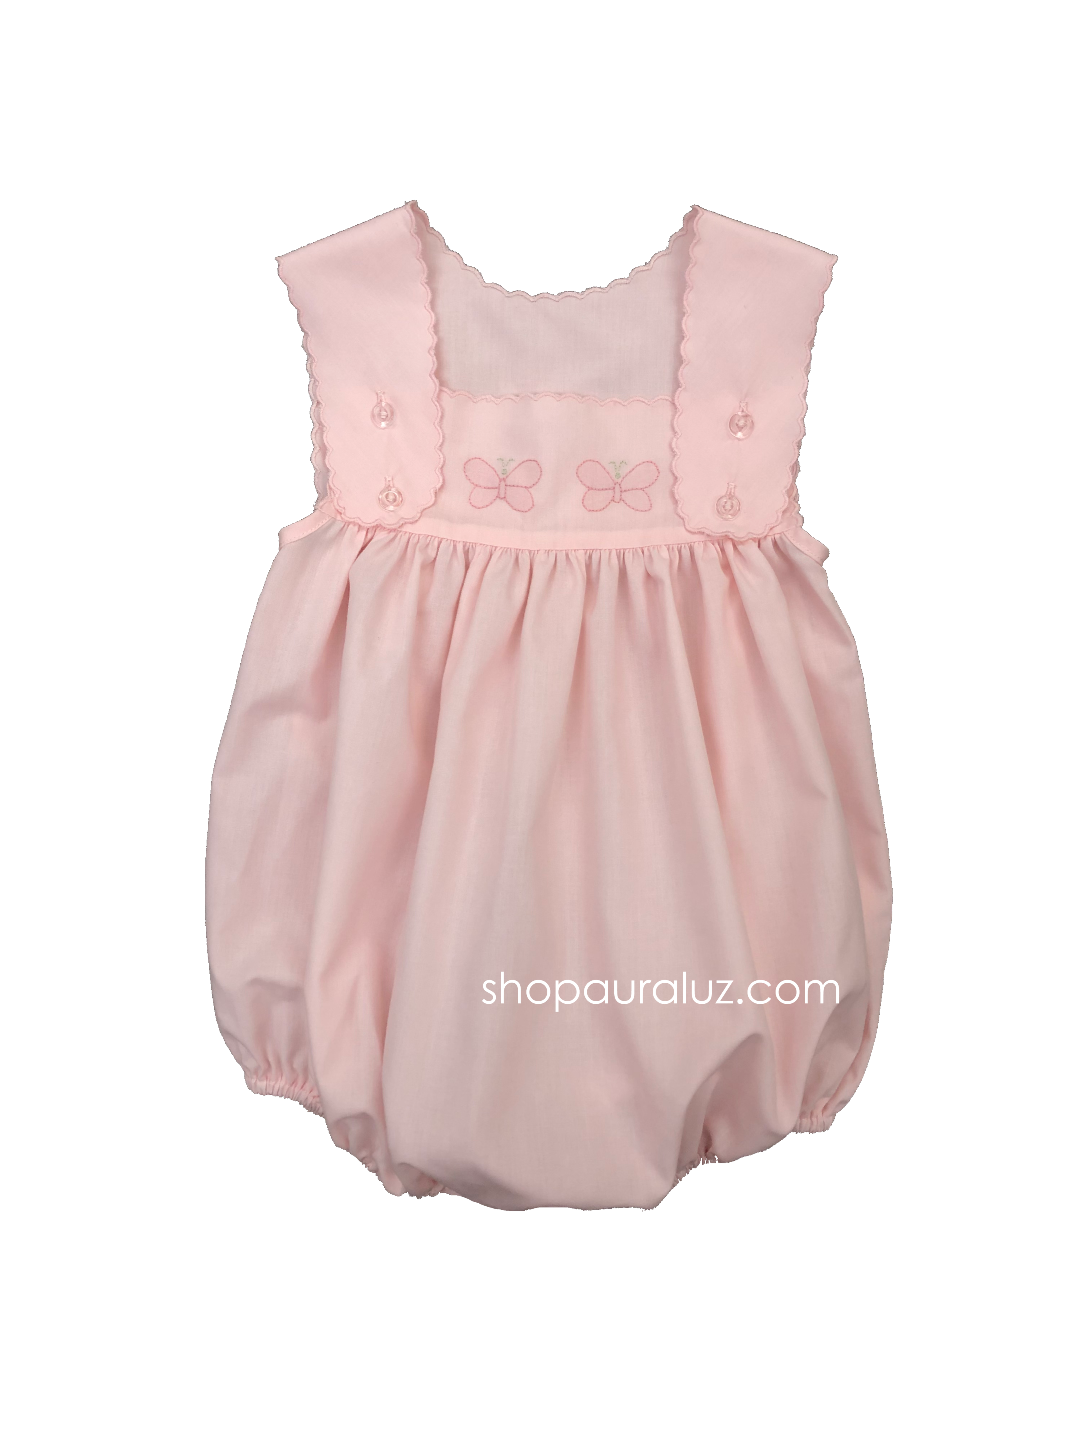 Auraluz Sleeveless Bubble...Pink with pink scallop trim and embroidered butterflies